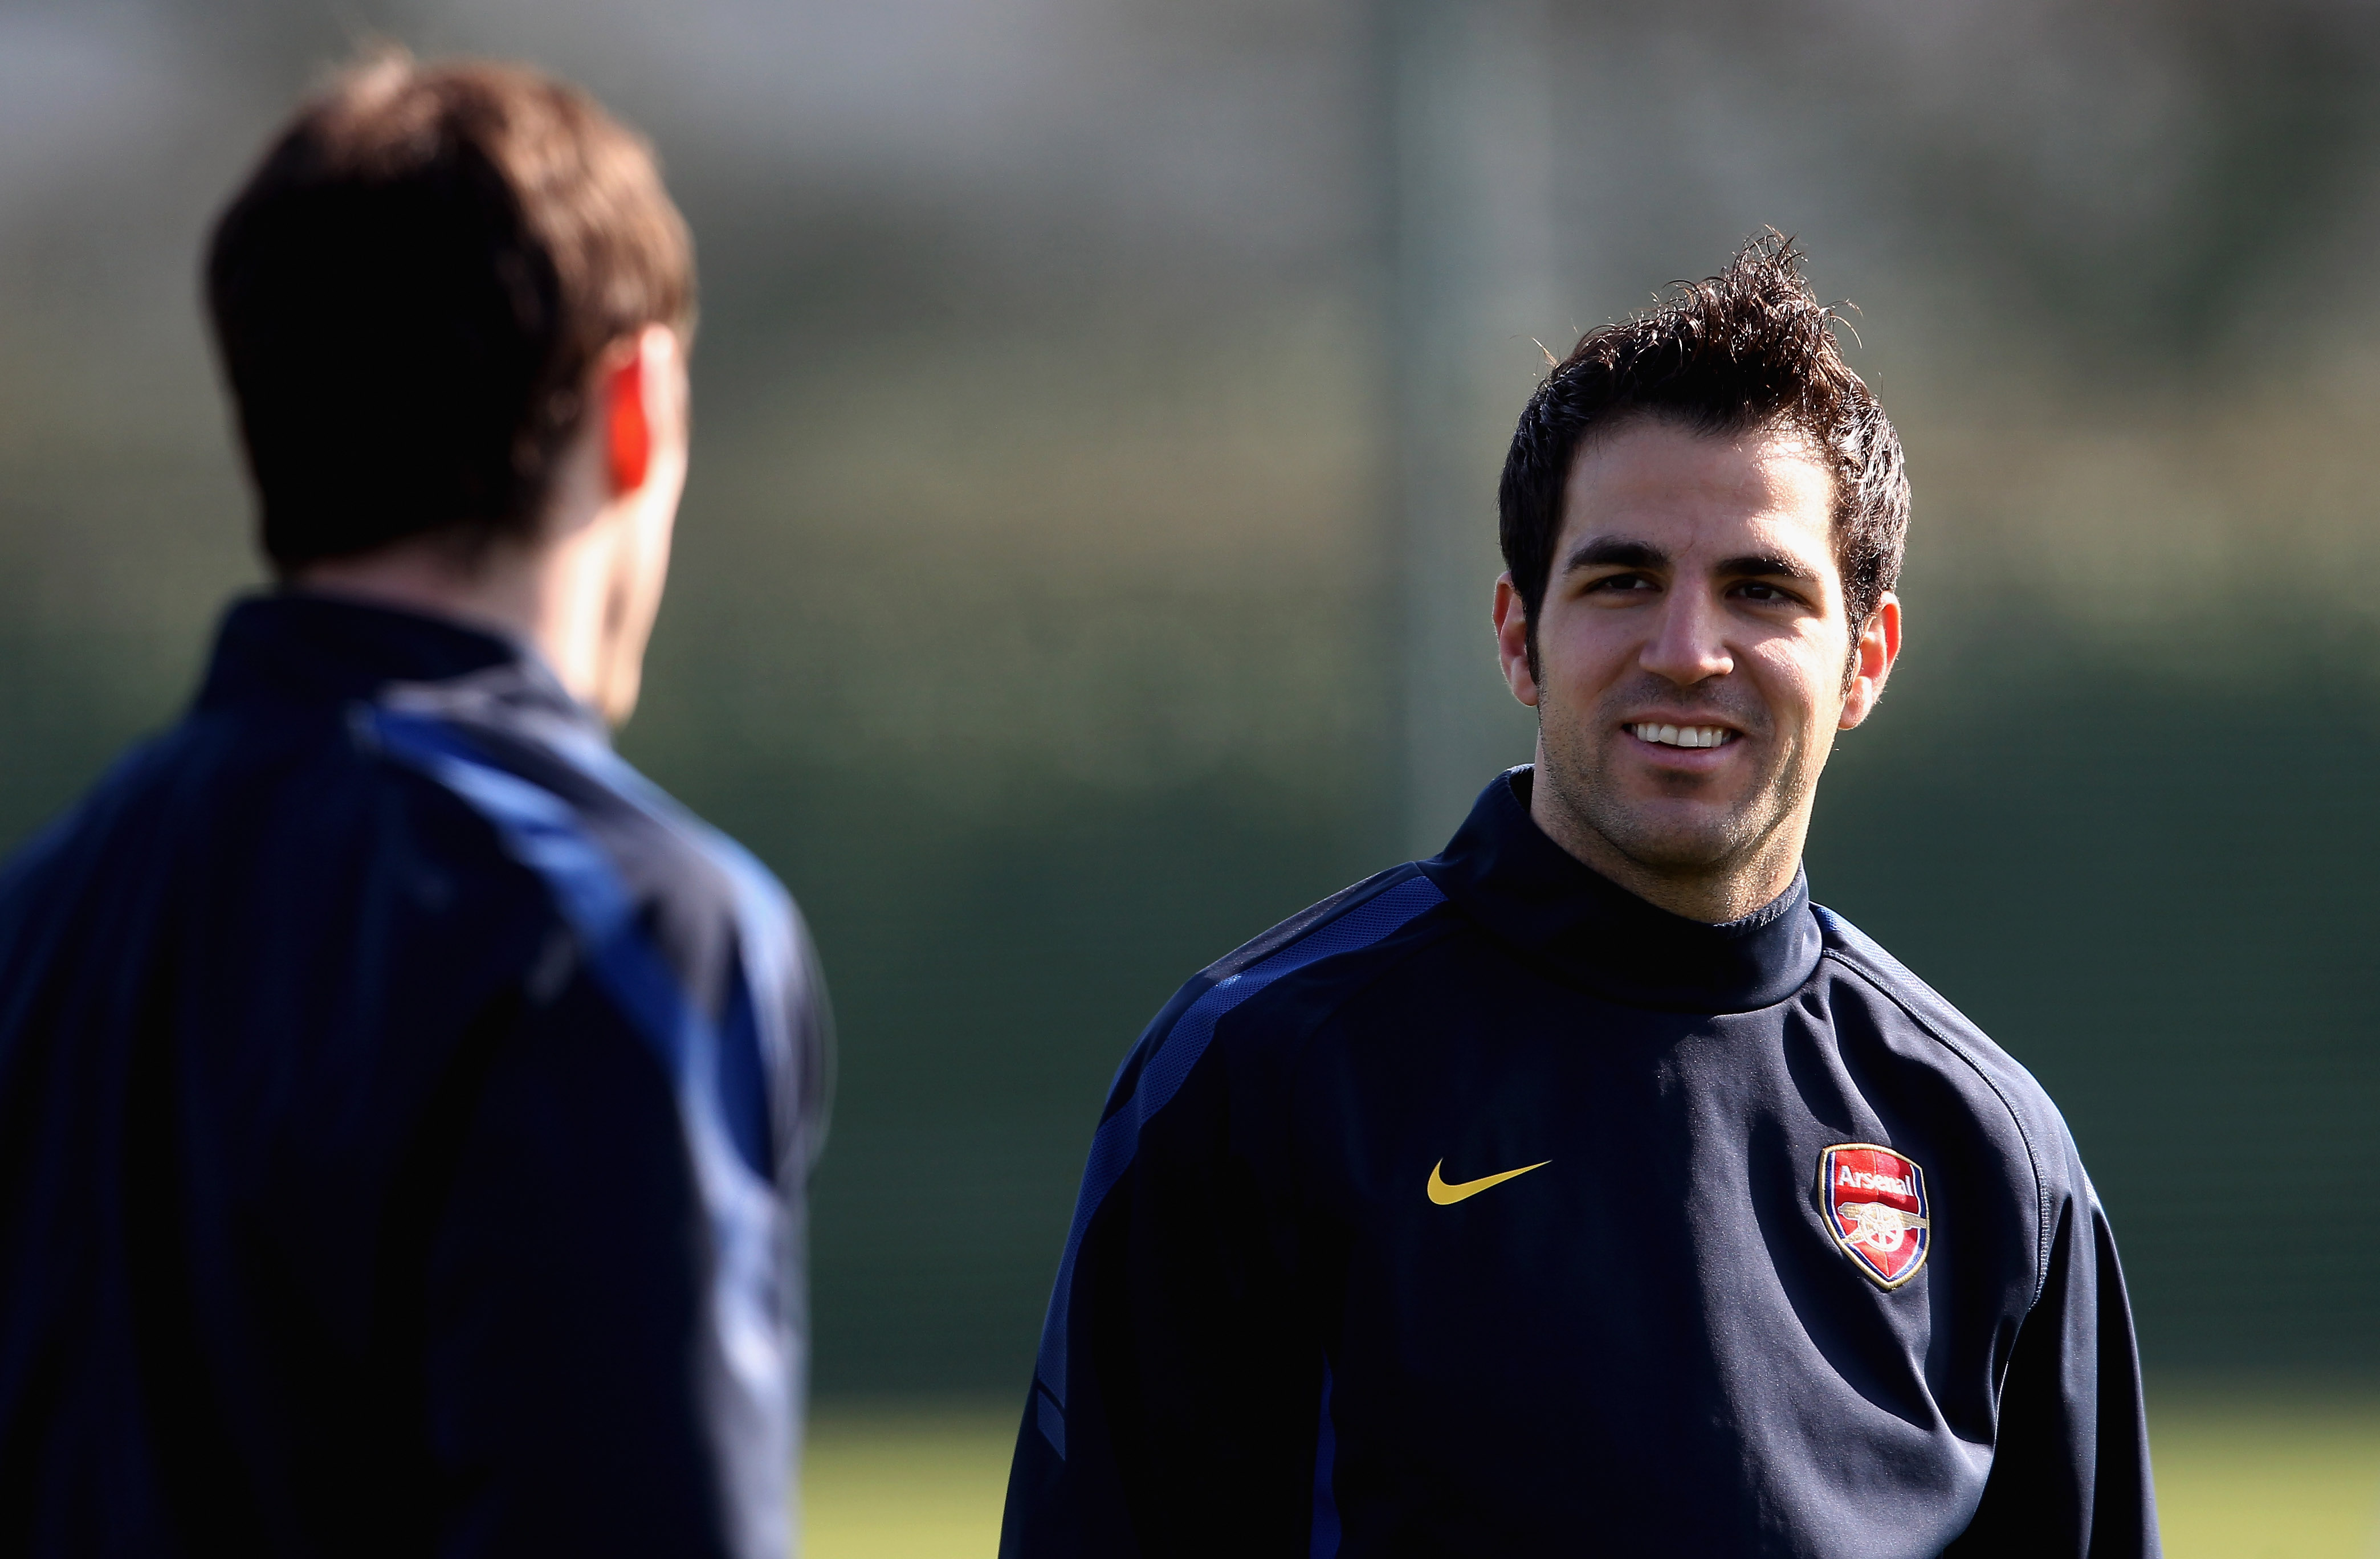 ST ALBANS, ENGLAND - MARCH 07:  Cesc Fabregas of Arsenal during a training session ahead of the UEFA Champions League Round of 16 second leg match against Barcelona at London Colney on March 7, 2011 in St Albans, England.  (Photo by Scott Heavey/Getty Ima